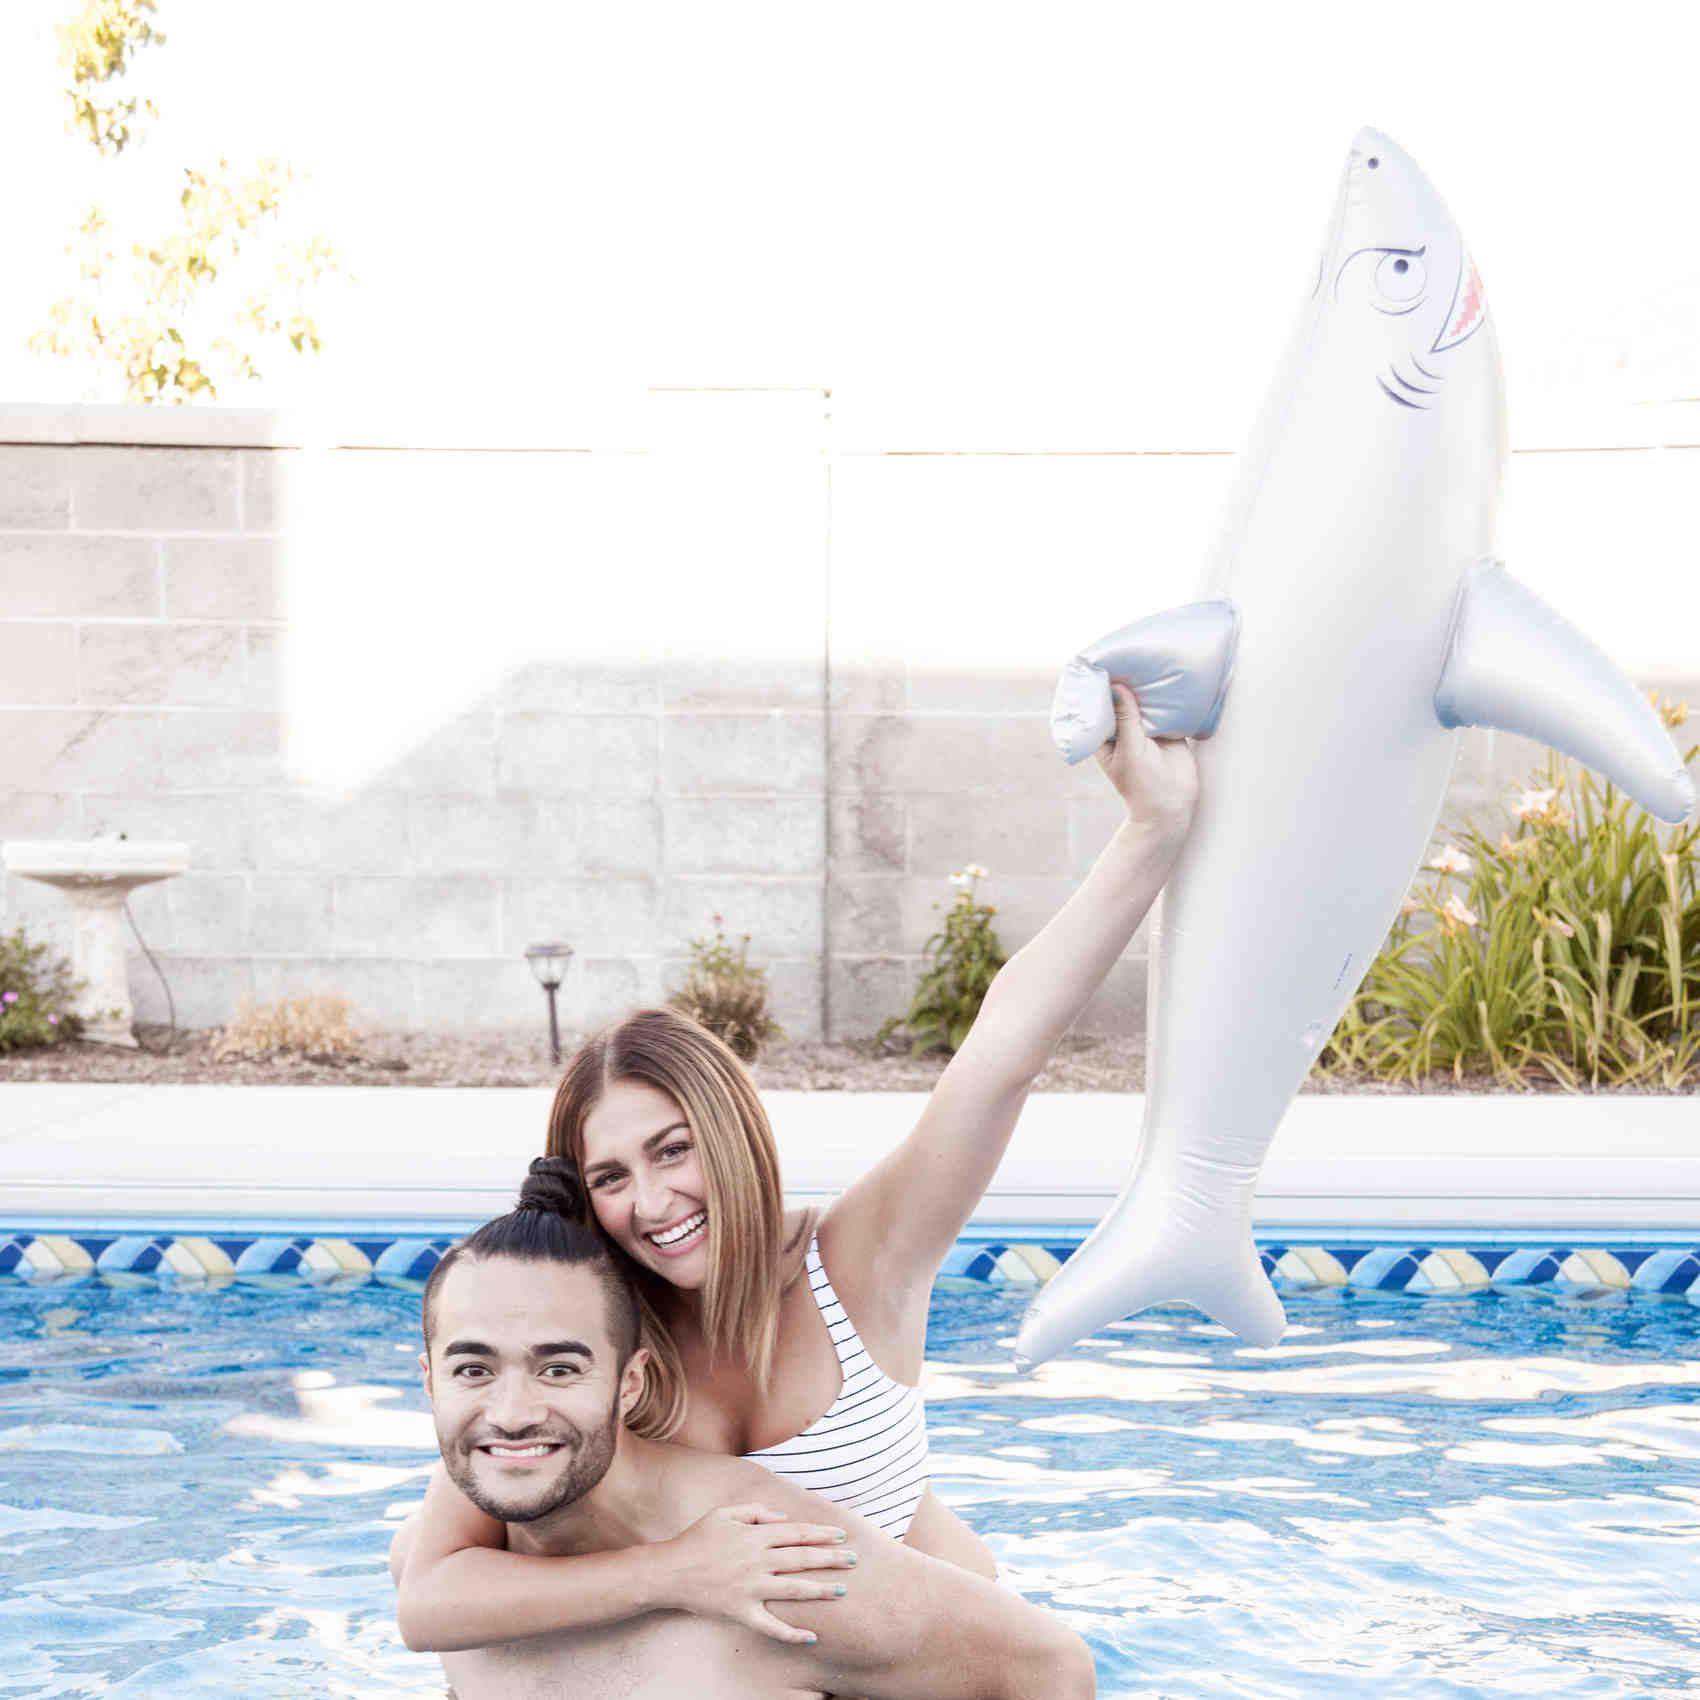 It's Shark Week! Let's Have a "Jawesome" Pool Party